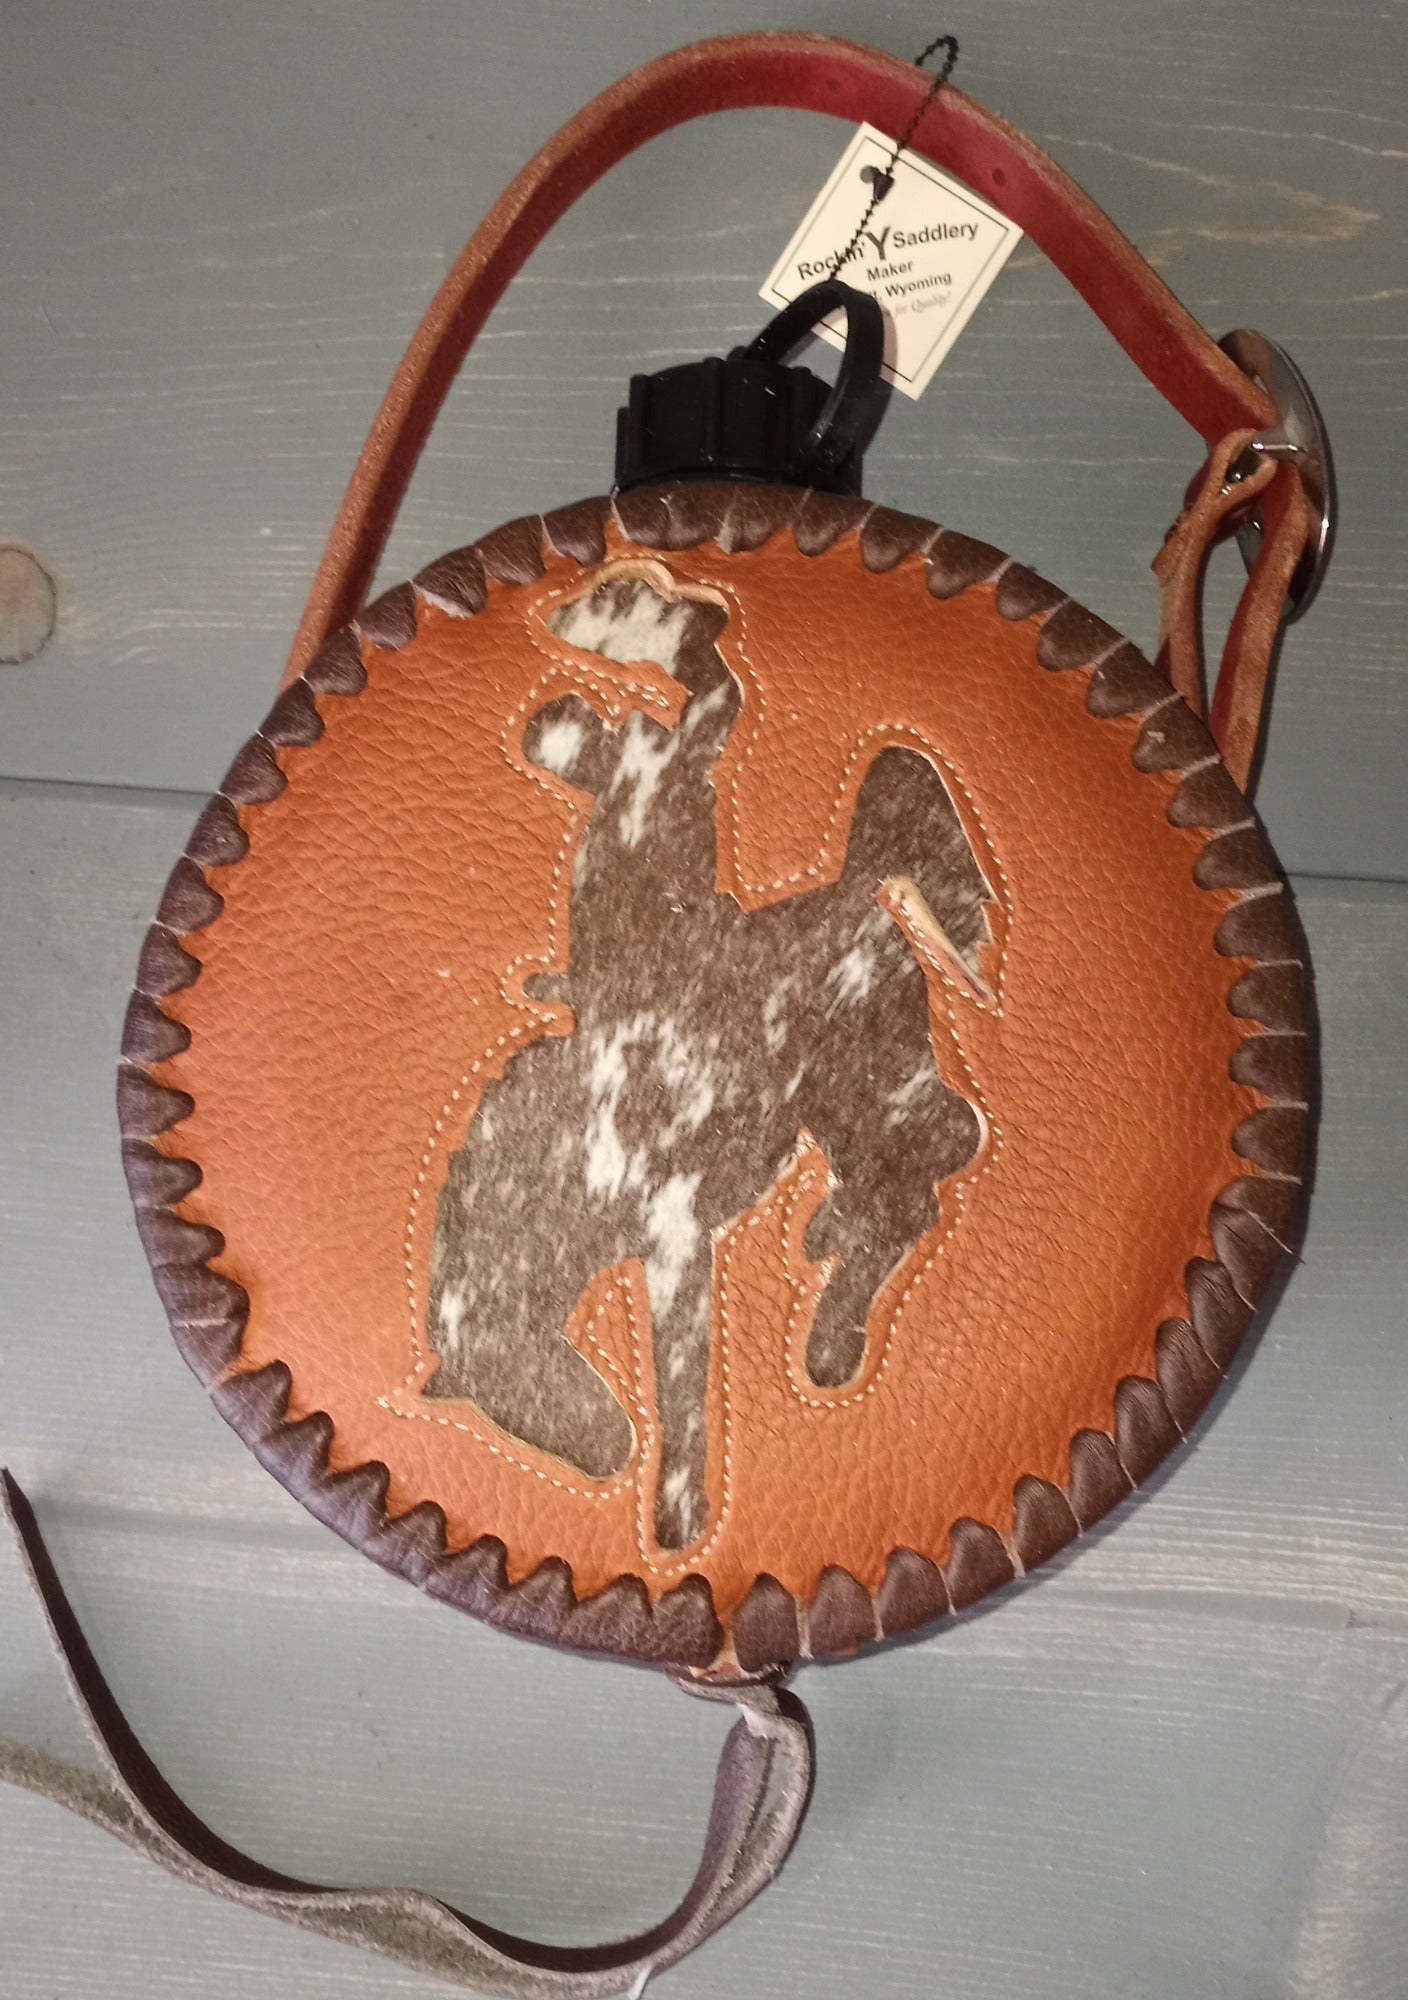 Canteen - Bronc or Buffalo in various colors